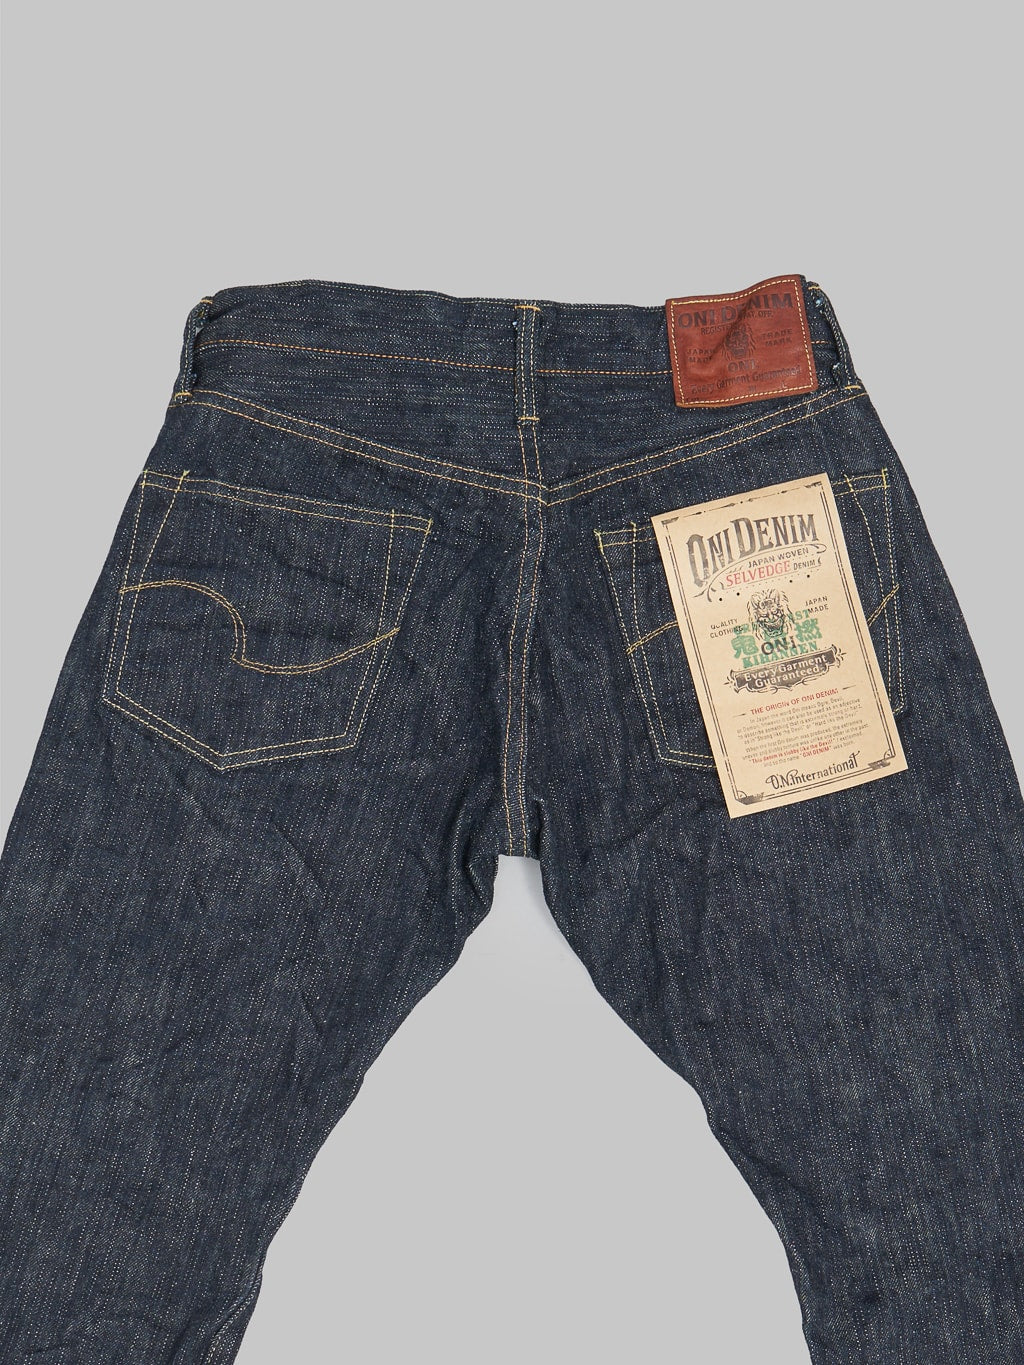 Oni denim kihannen relaxed tapered jeans back view